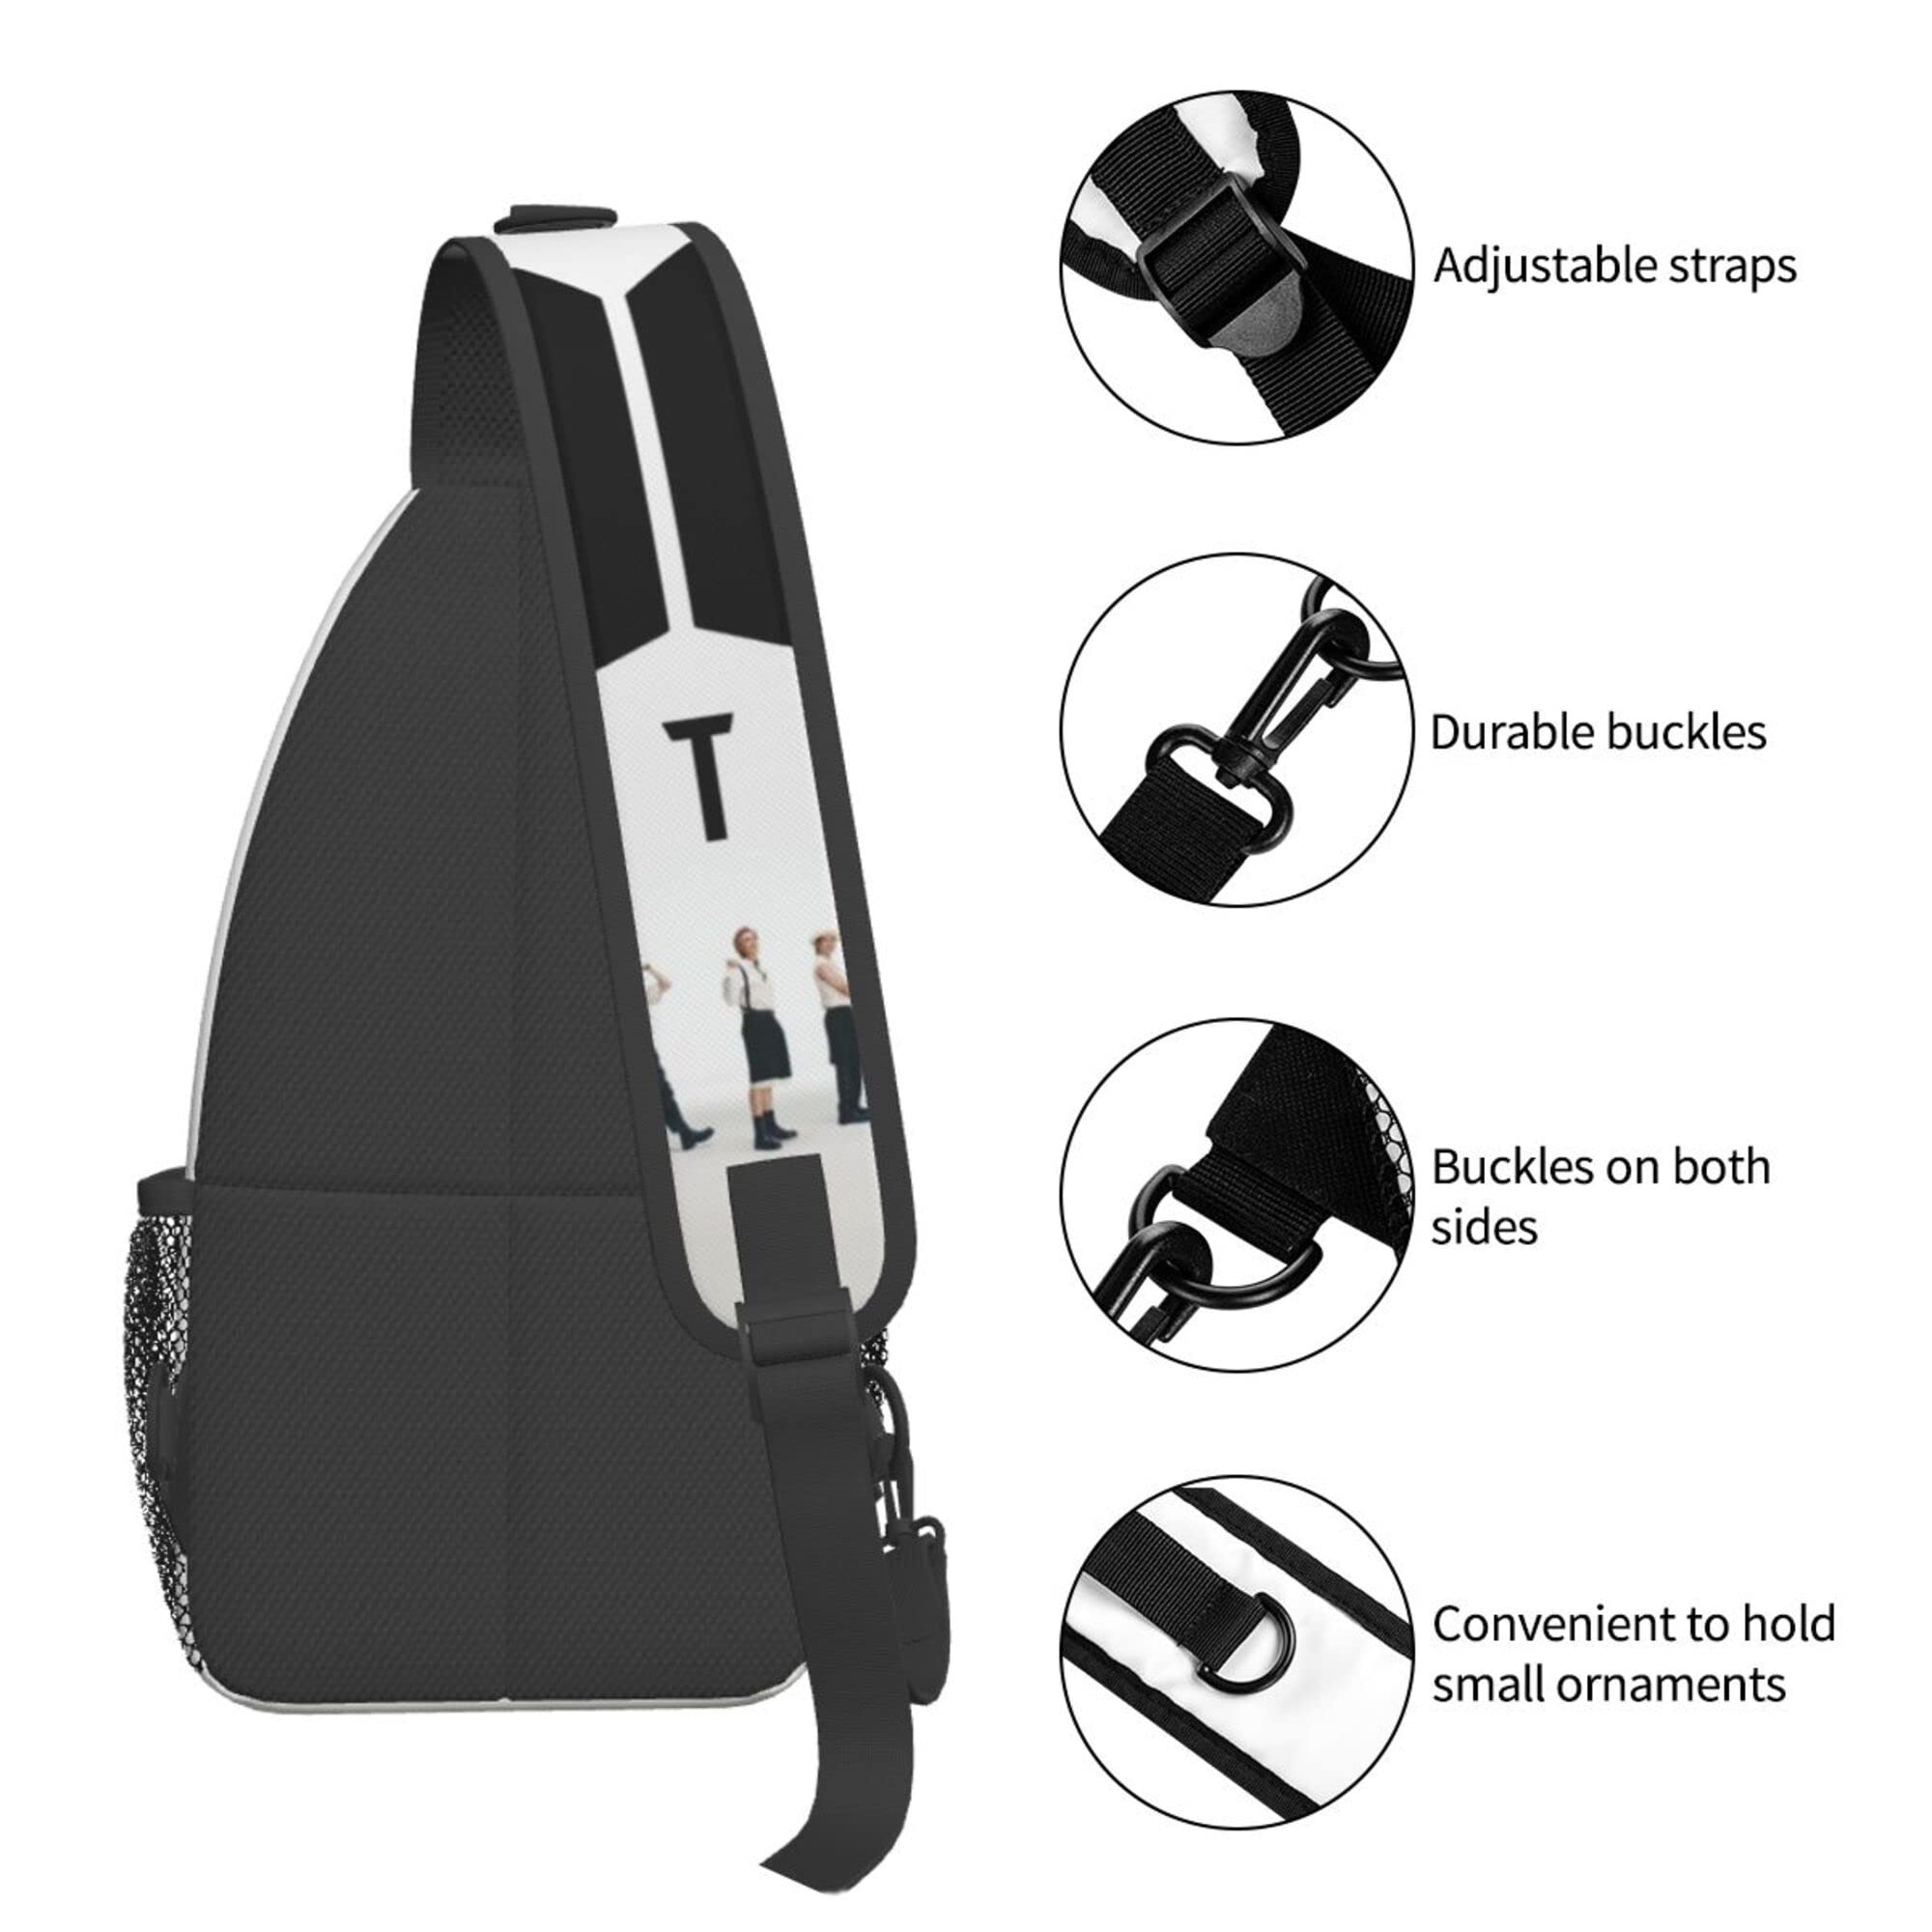 SSNDFVY Women & Men Anime Cartoon Large Capacity Sling Bag Crossbody Bags Backpack Shoulder Bag Chest Bags For Travel Hiking Gym Outdoor-A20